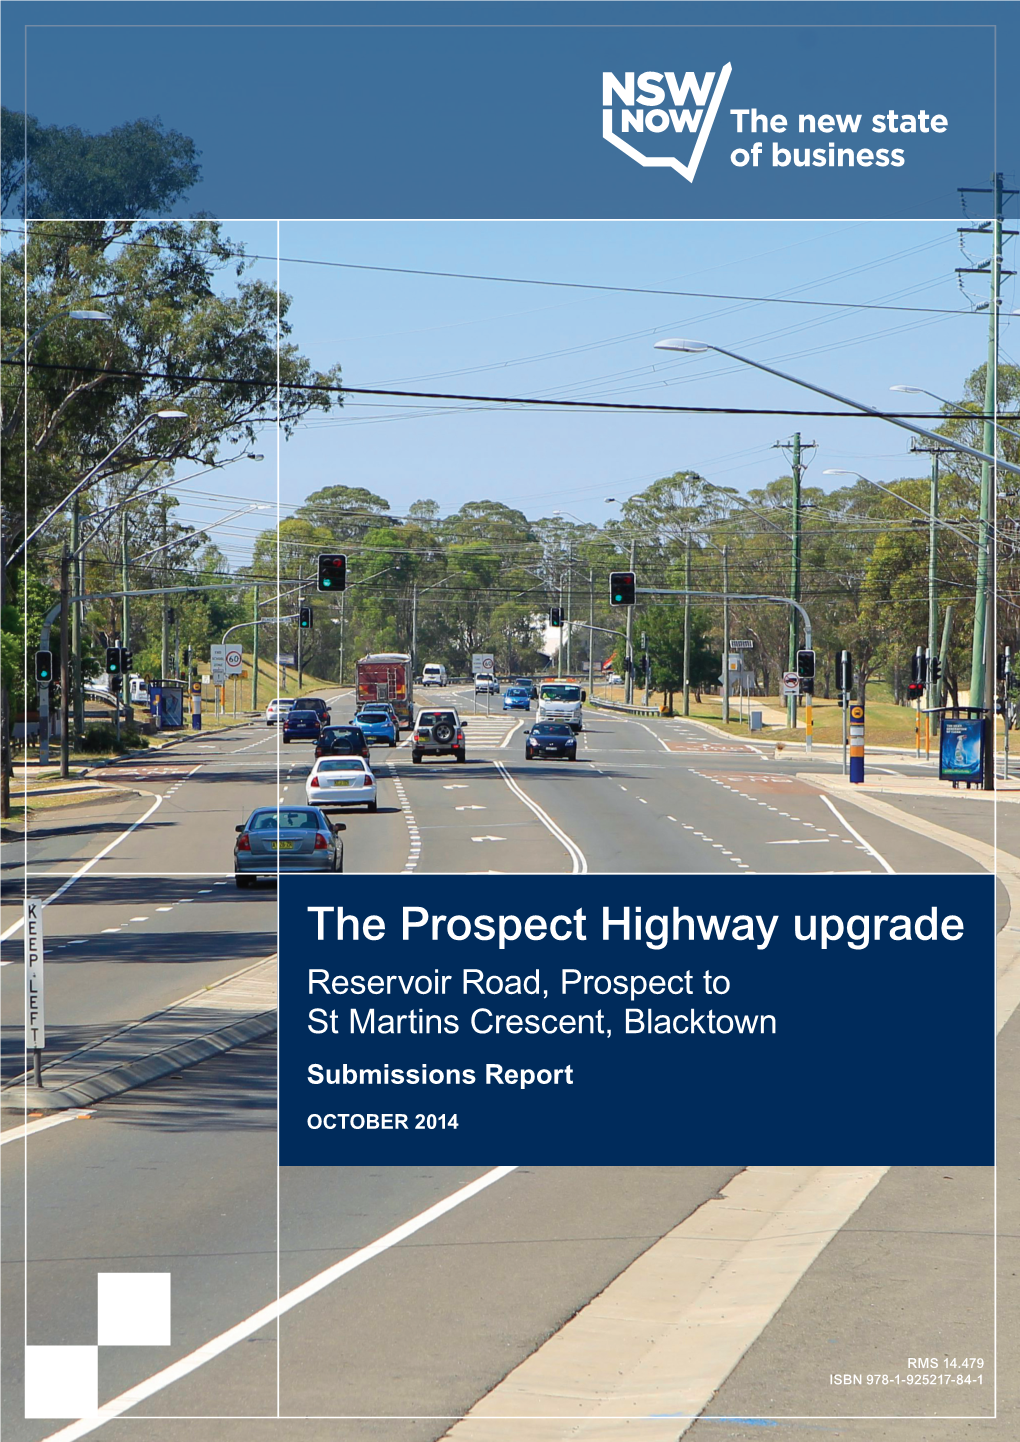 The Prospect Highway Upgrade Reservoir Road, Prospect to St Martins Crescent, Blacktown Submissions Report